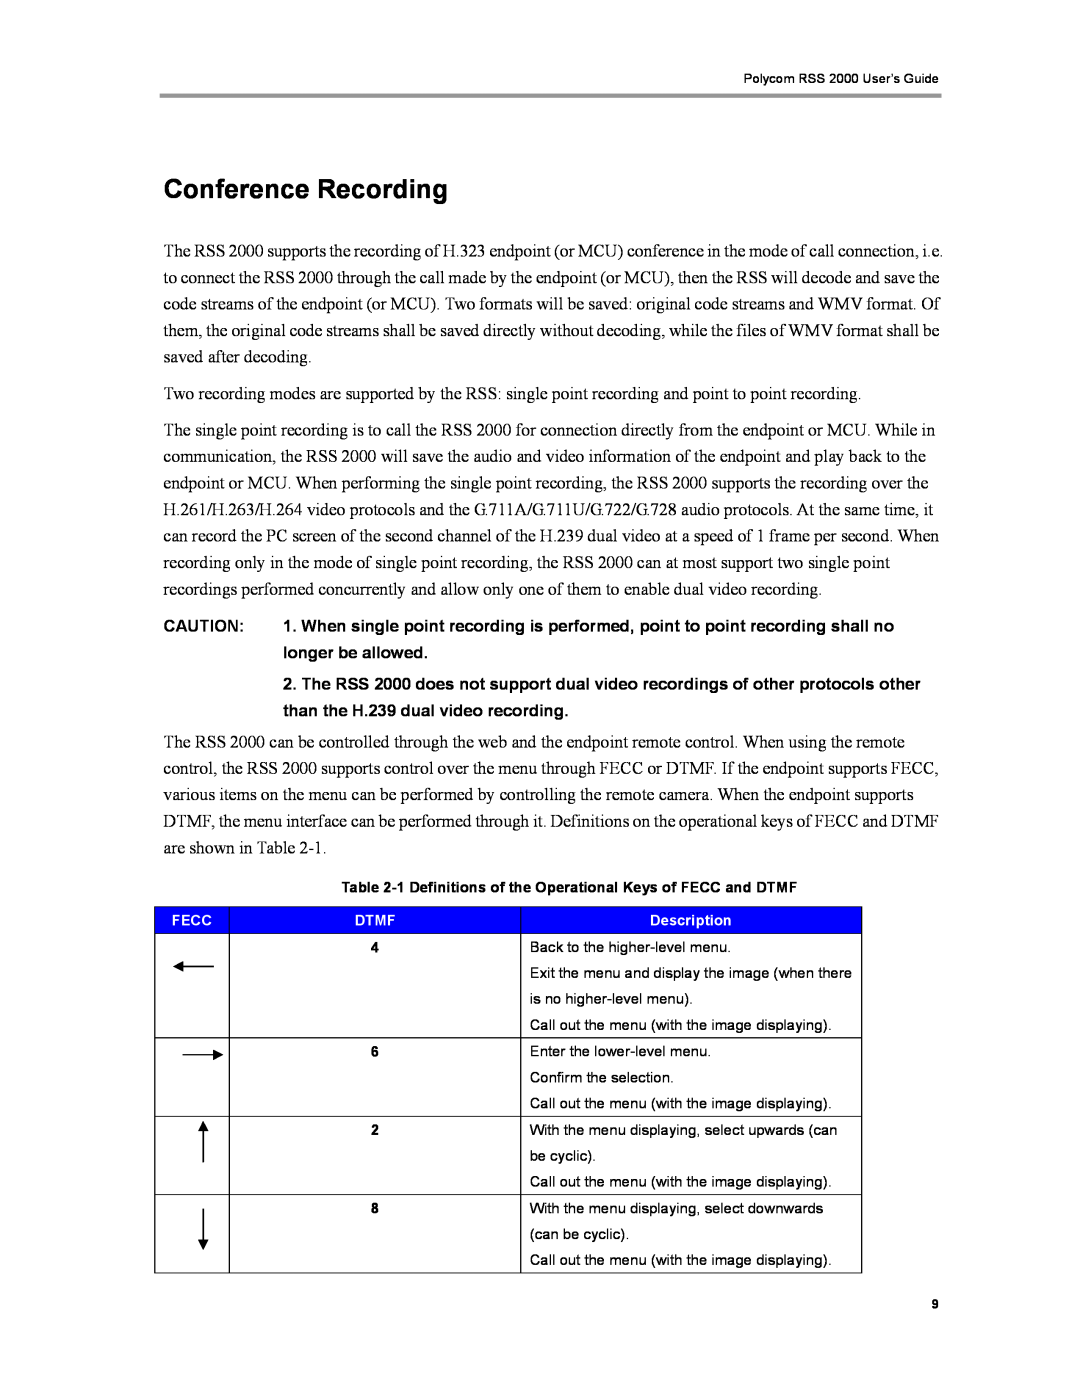 Polycom RSS 2000 manual Conference Recording, longer be allowed, than the H.239 dual video recording 